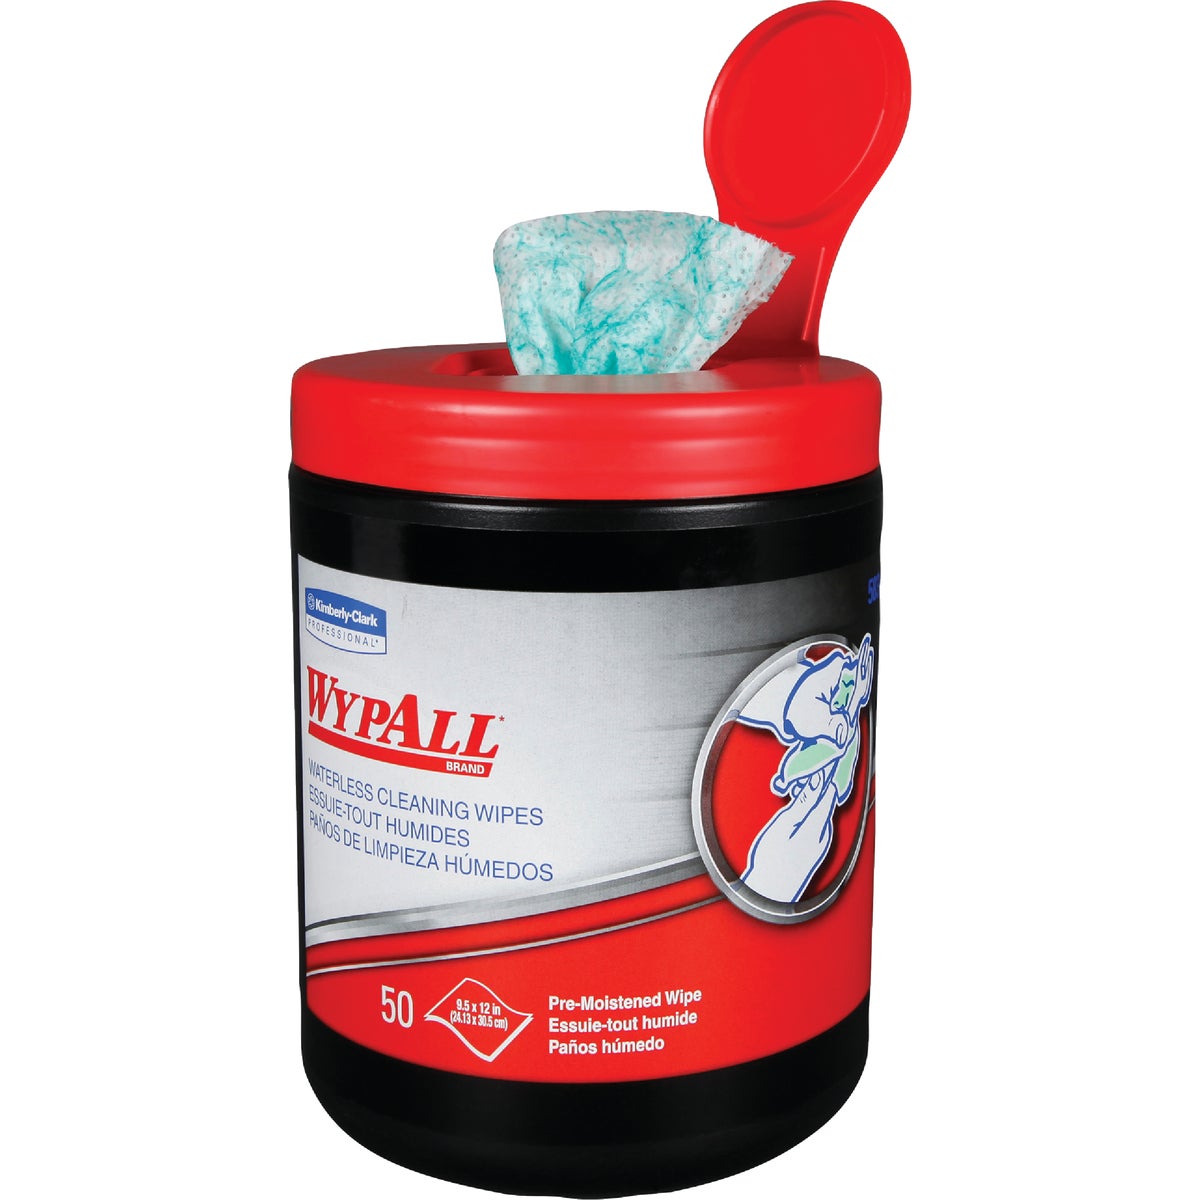 Wypall textured hand wipes in stock